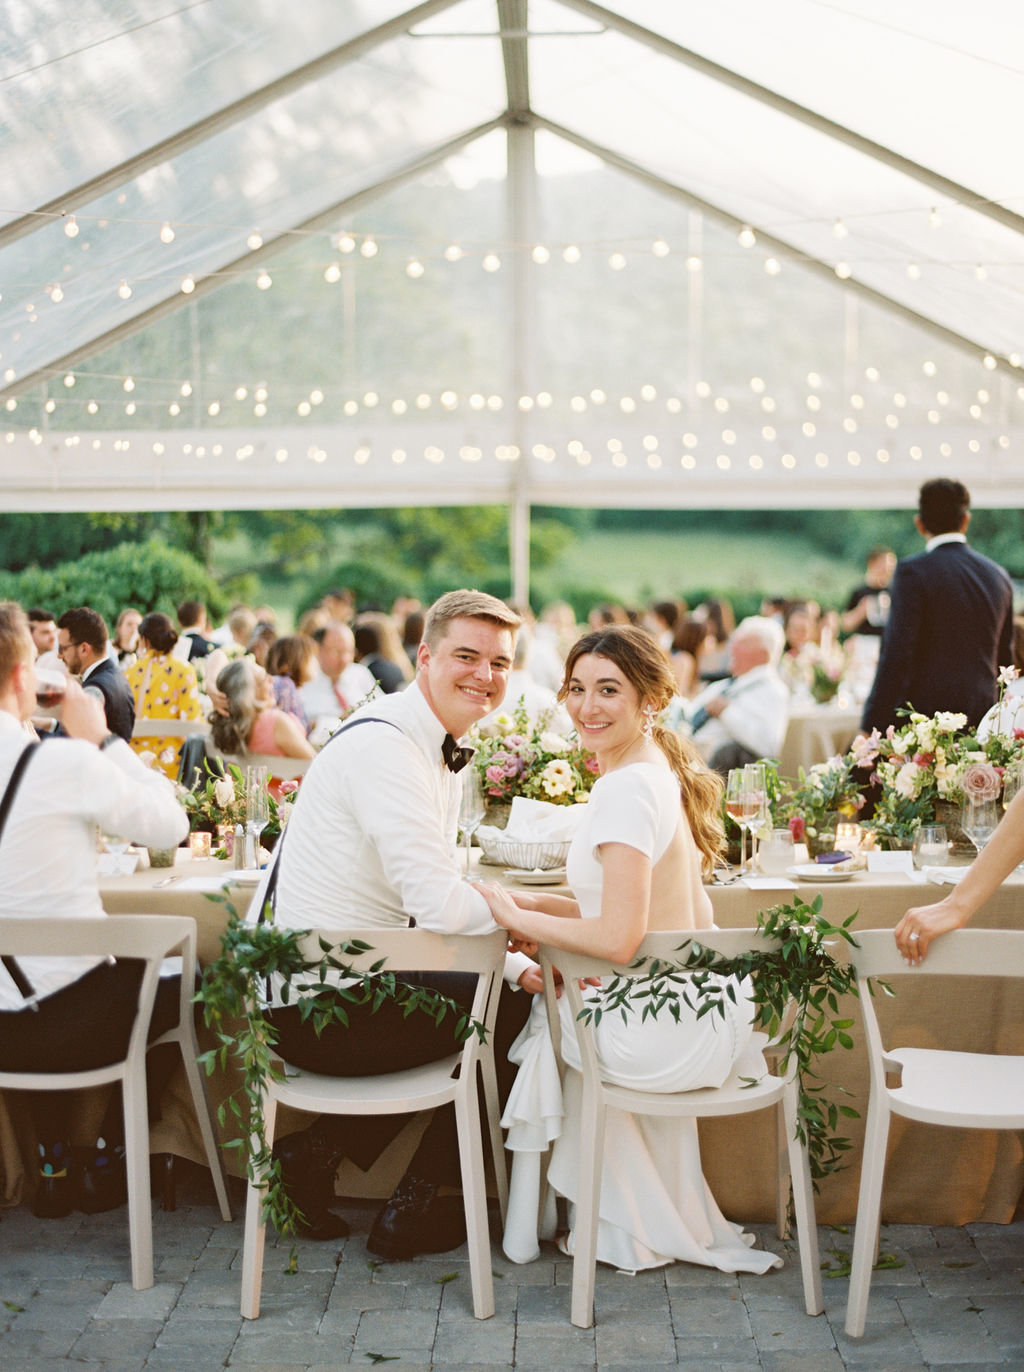 Bride and Groom at Head Table in Outdoor Tented Reception for Southern Garden Wedding